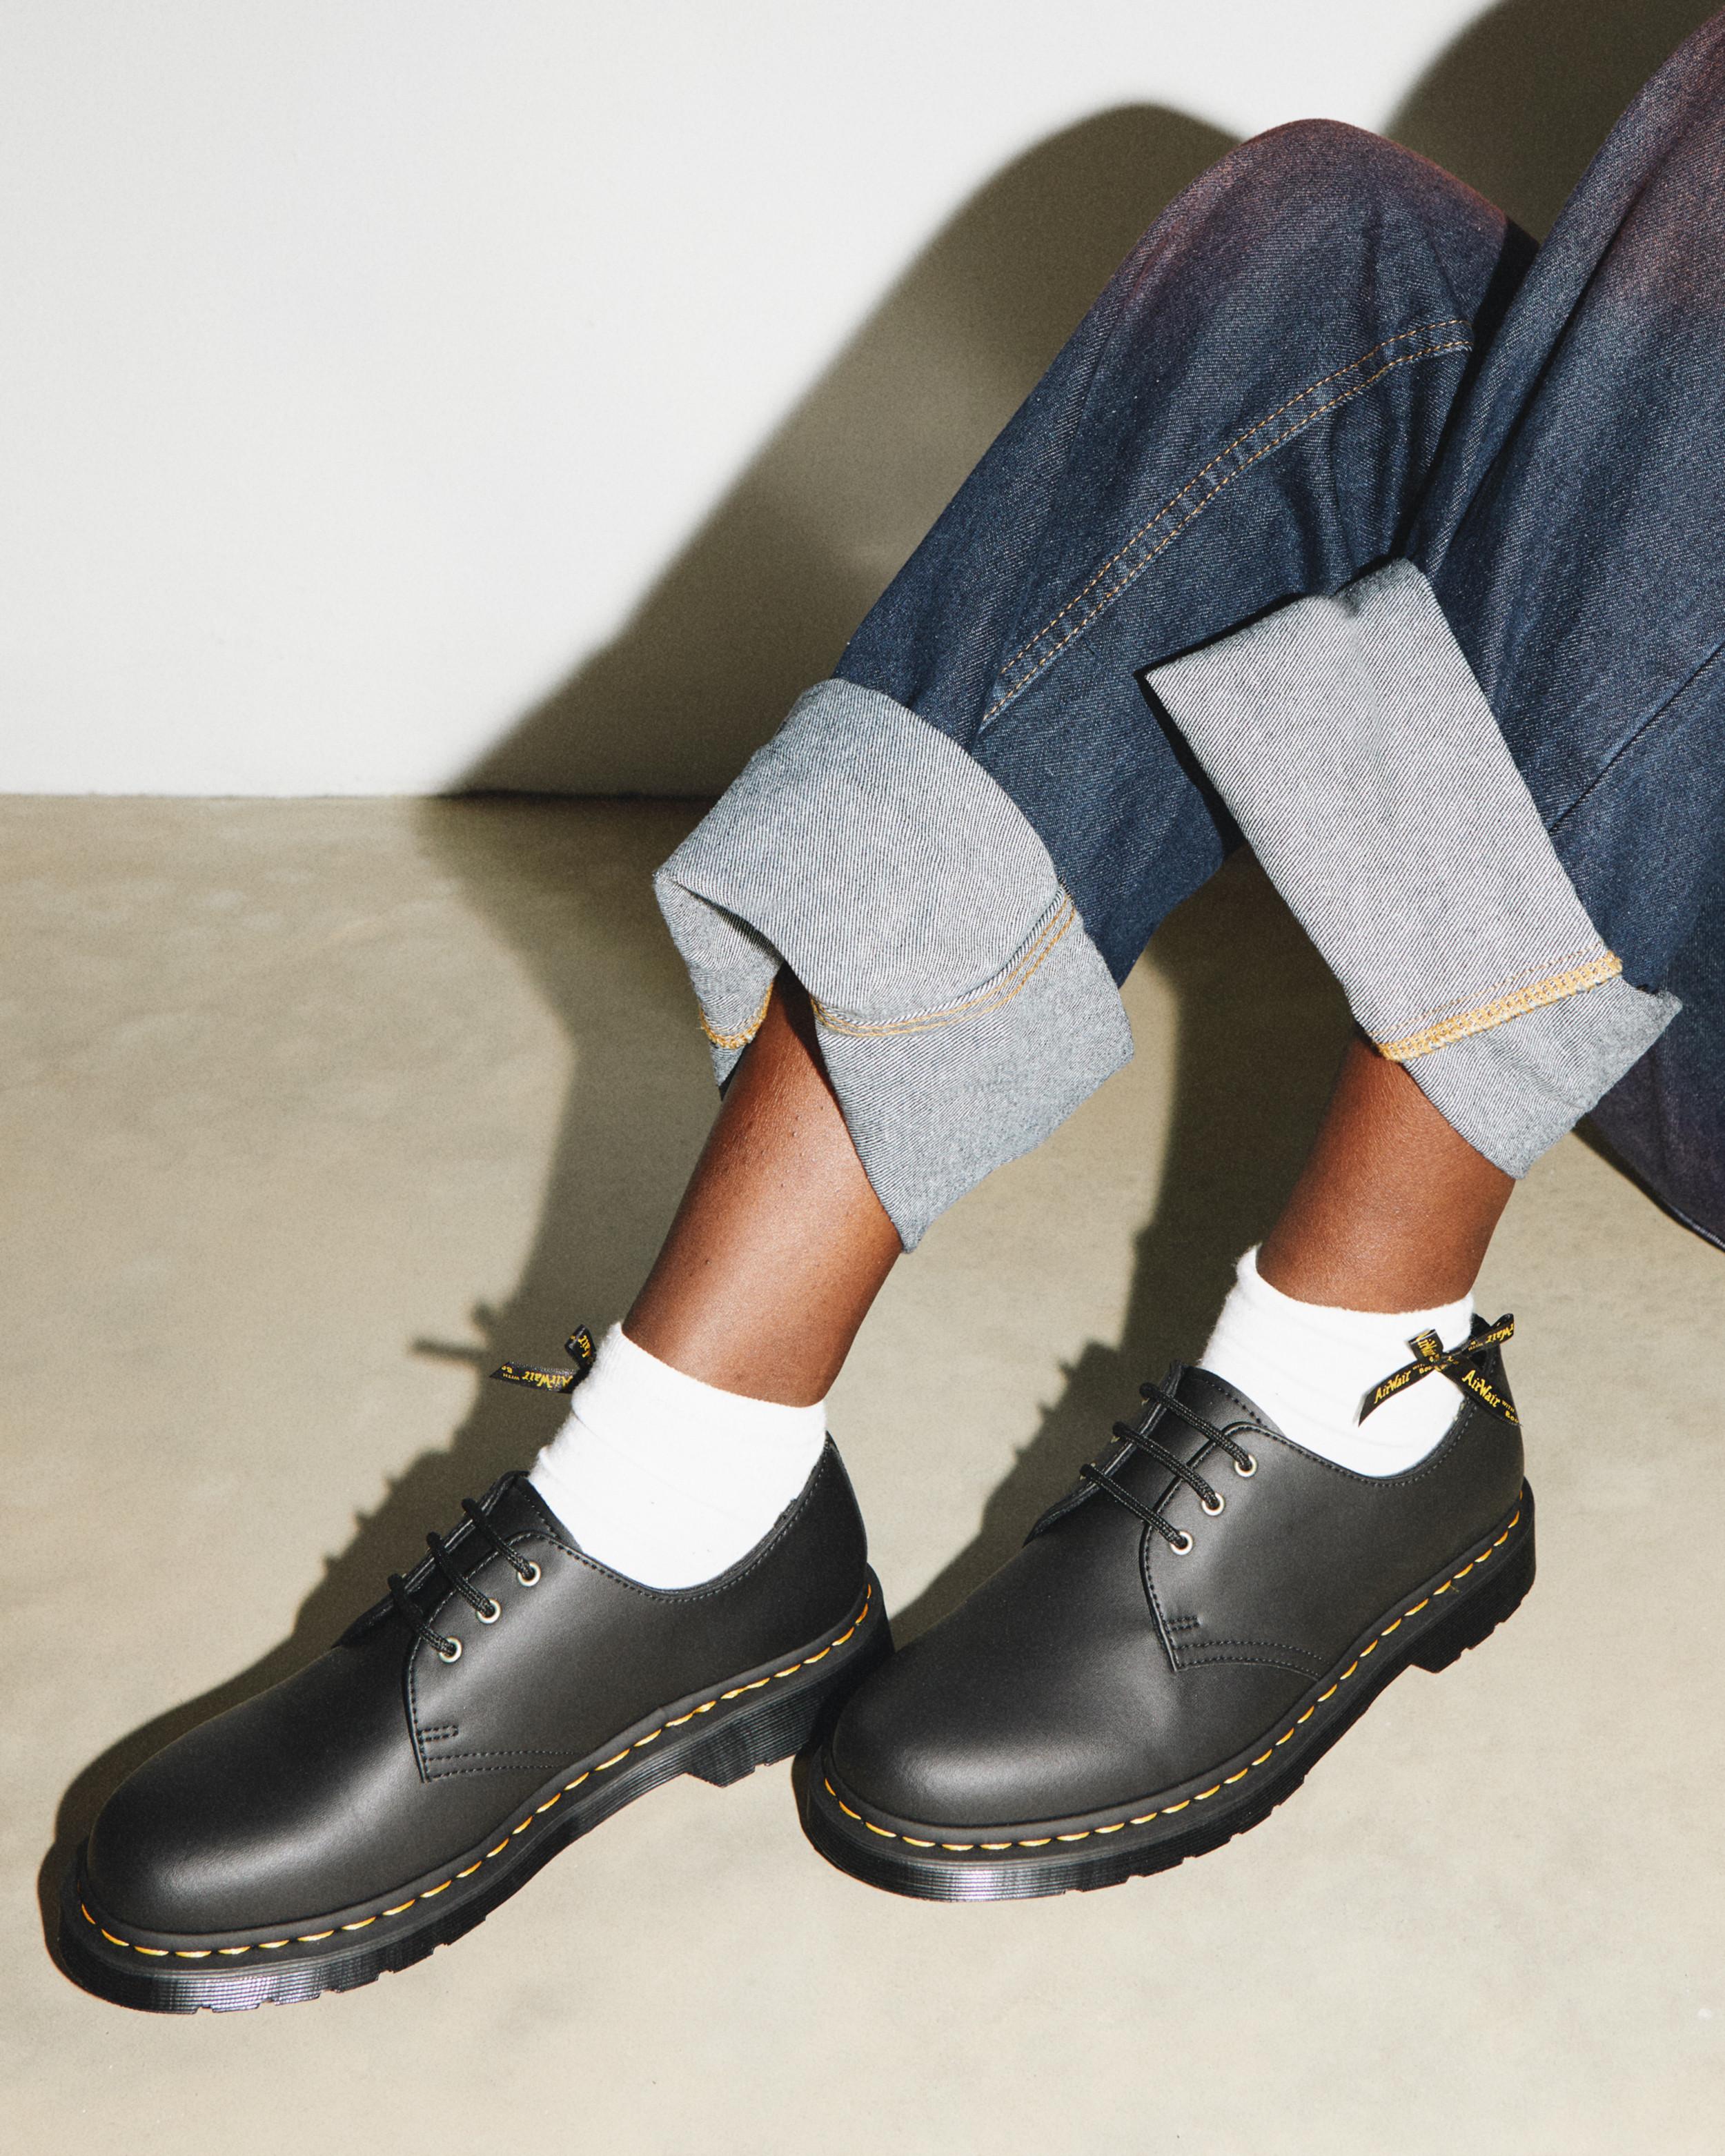 1461 Reclaimed Leather Oxford Shoes in Black